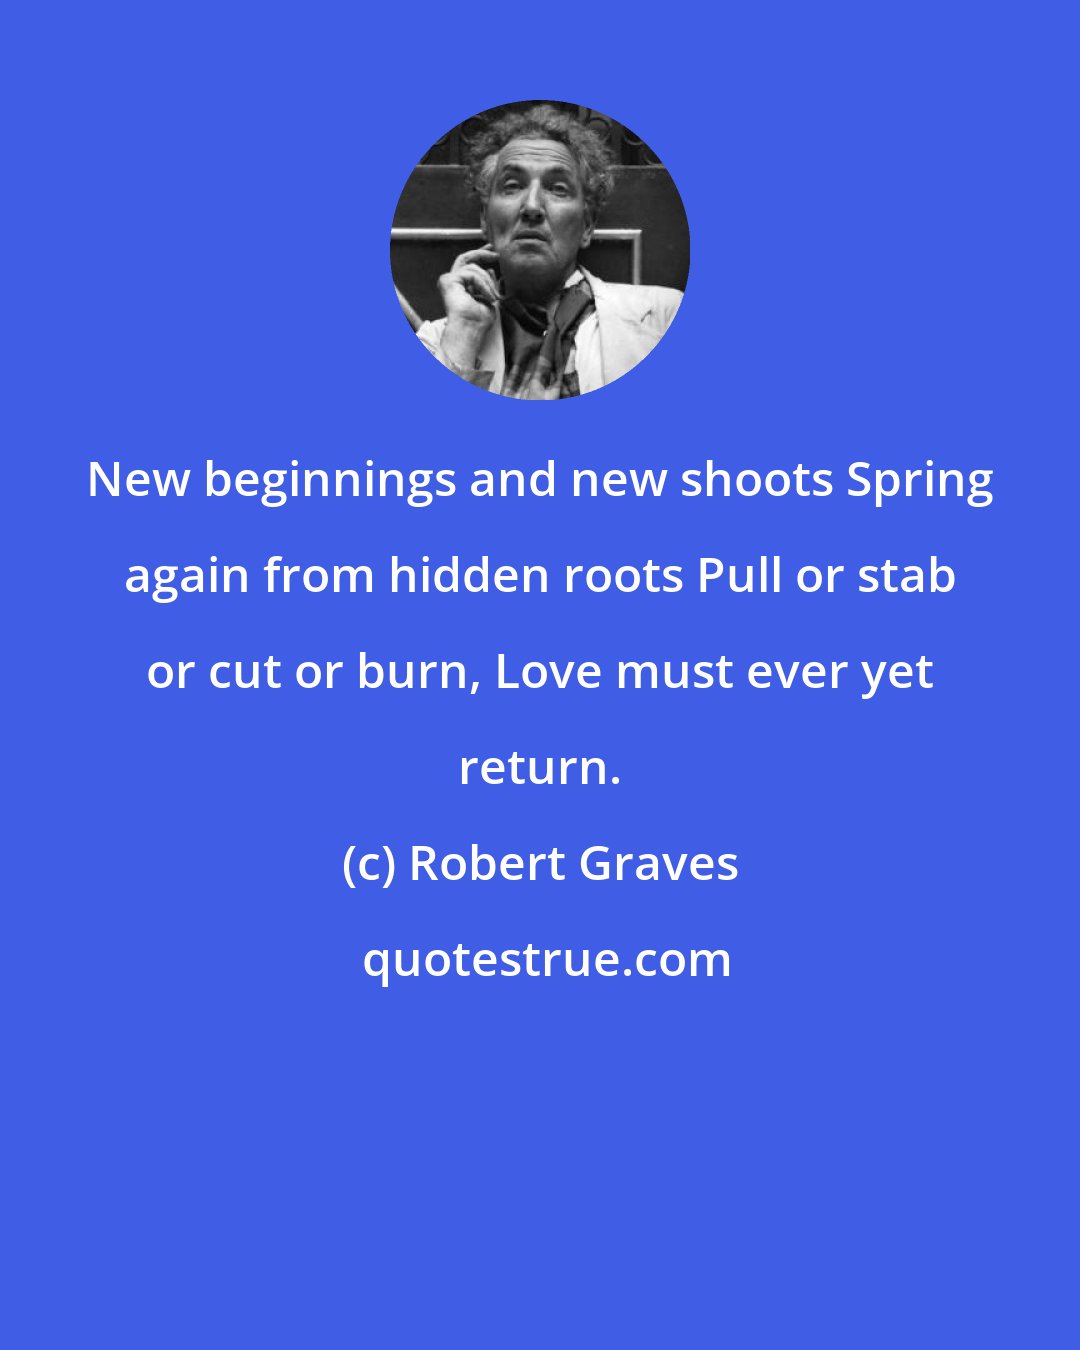 Robert Graves: New beginnings and new shoots Spring again from hidden roots Pull or stab or cut or burn, Love must ever yet return.